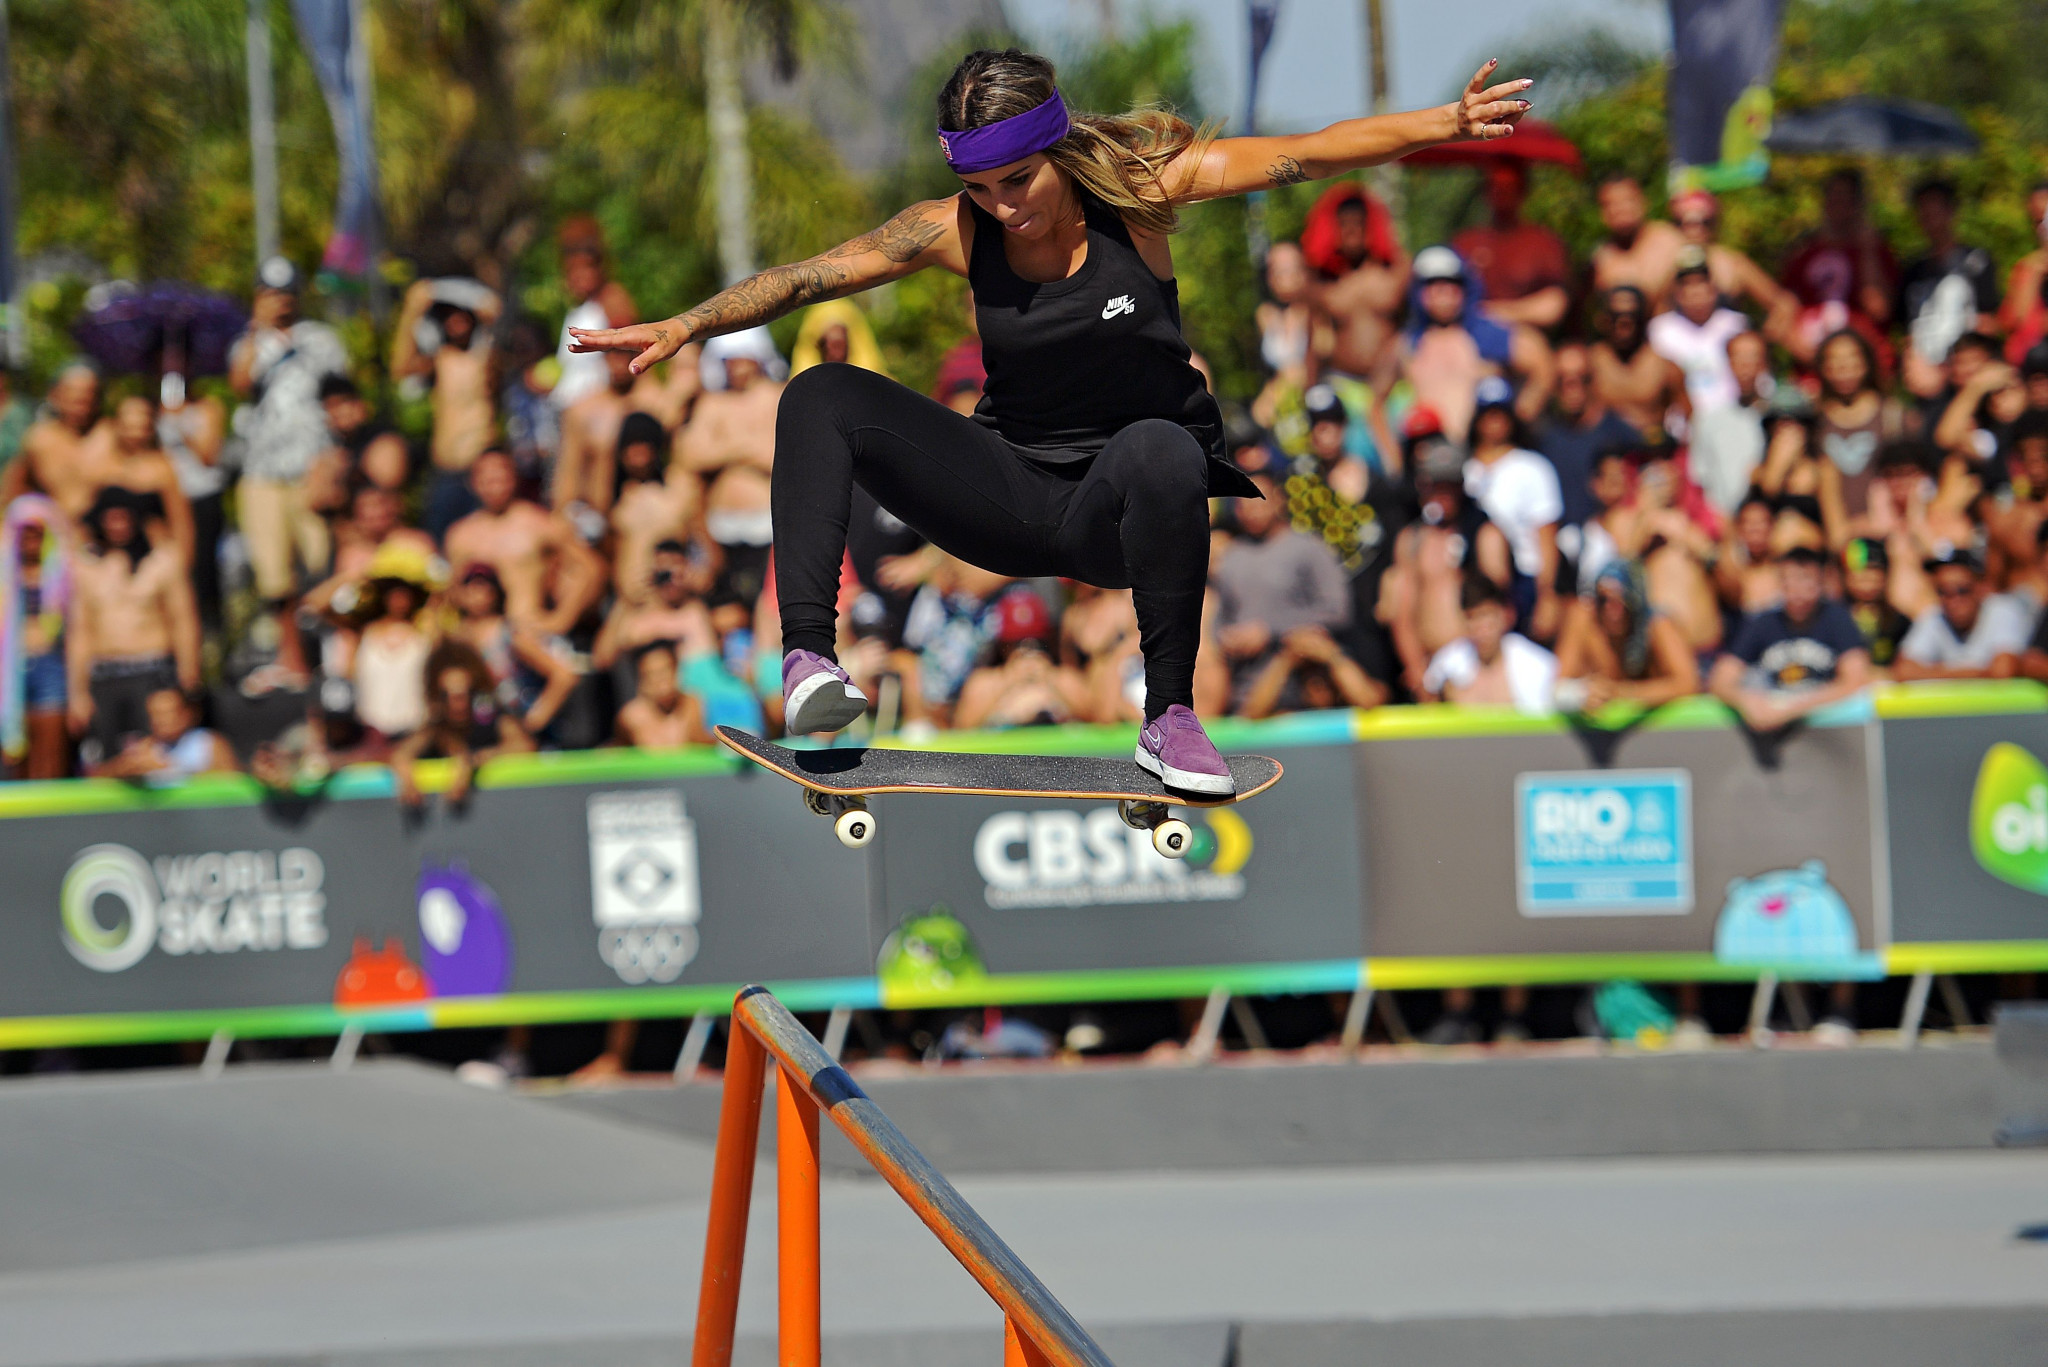 Brazil's Leticia Bufoni added another X Games gold to her collection in the women's skateboard street event in Shanghai ©Getty Images